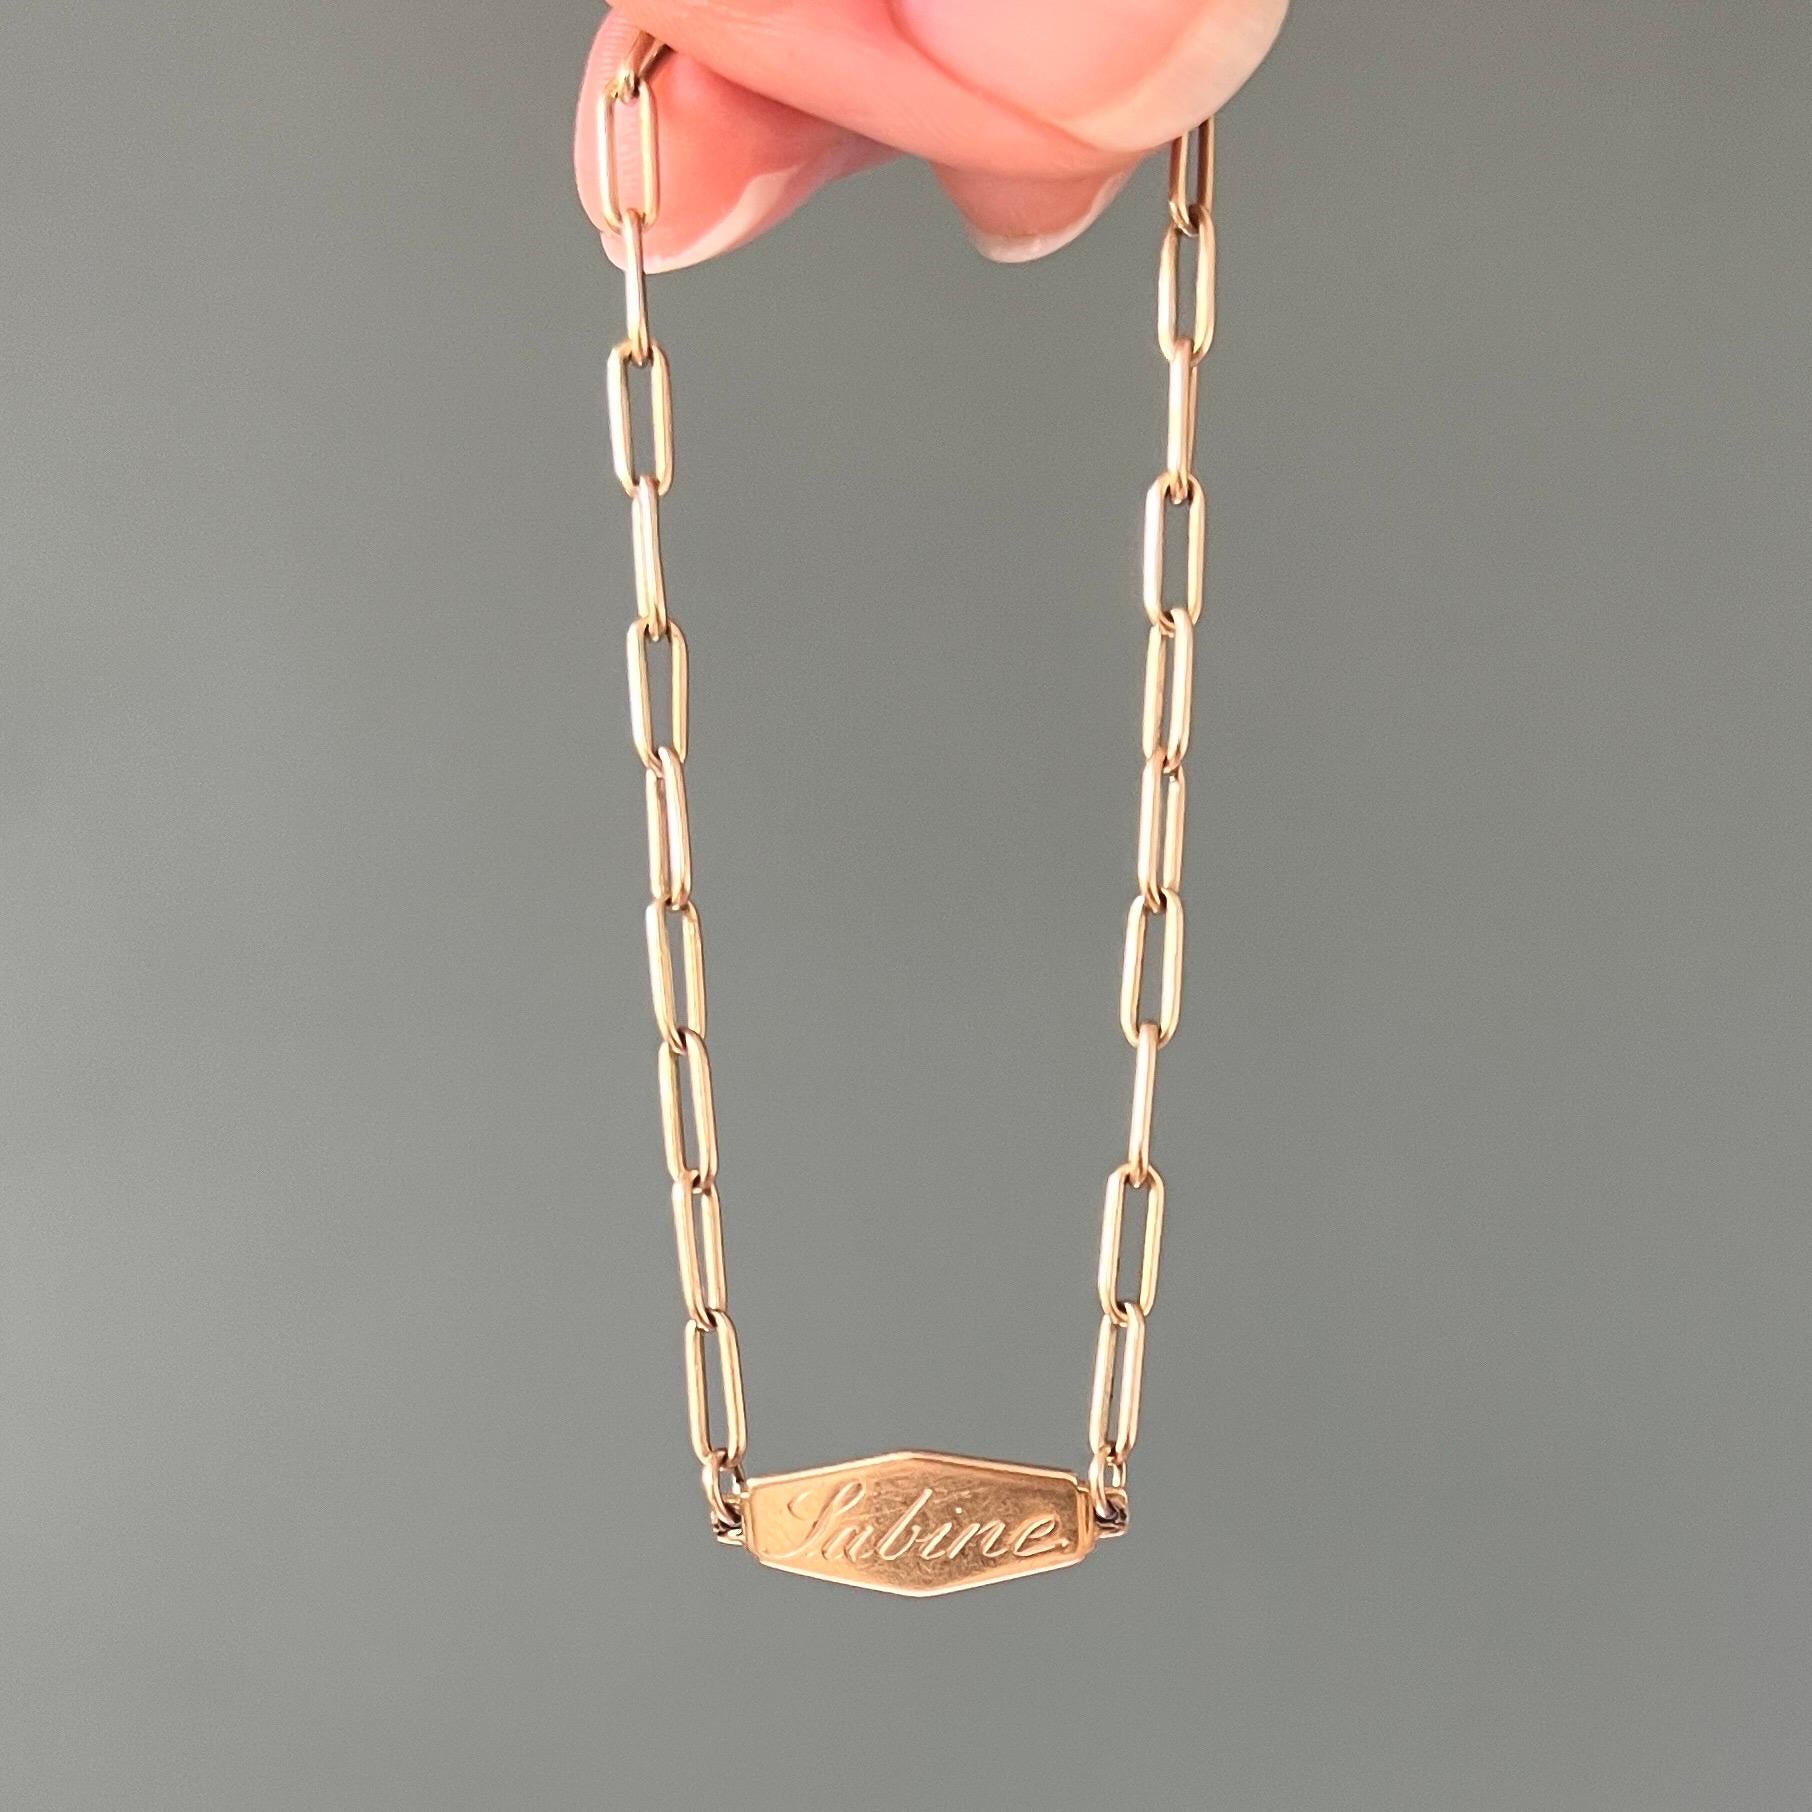 A vintage1 4 karat yellow gold clasping link bracelet. This link bracelet is also suitable for a charms bracelet, on which charms with a beautiful memory can be worn. The bracelet is a timeless must-have and can be perfectly combined with all your